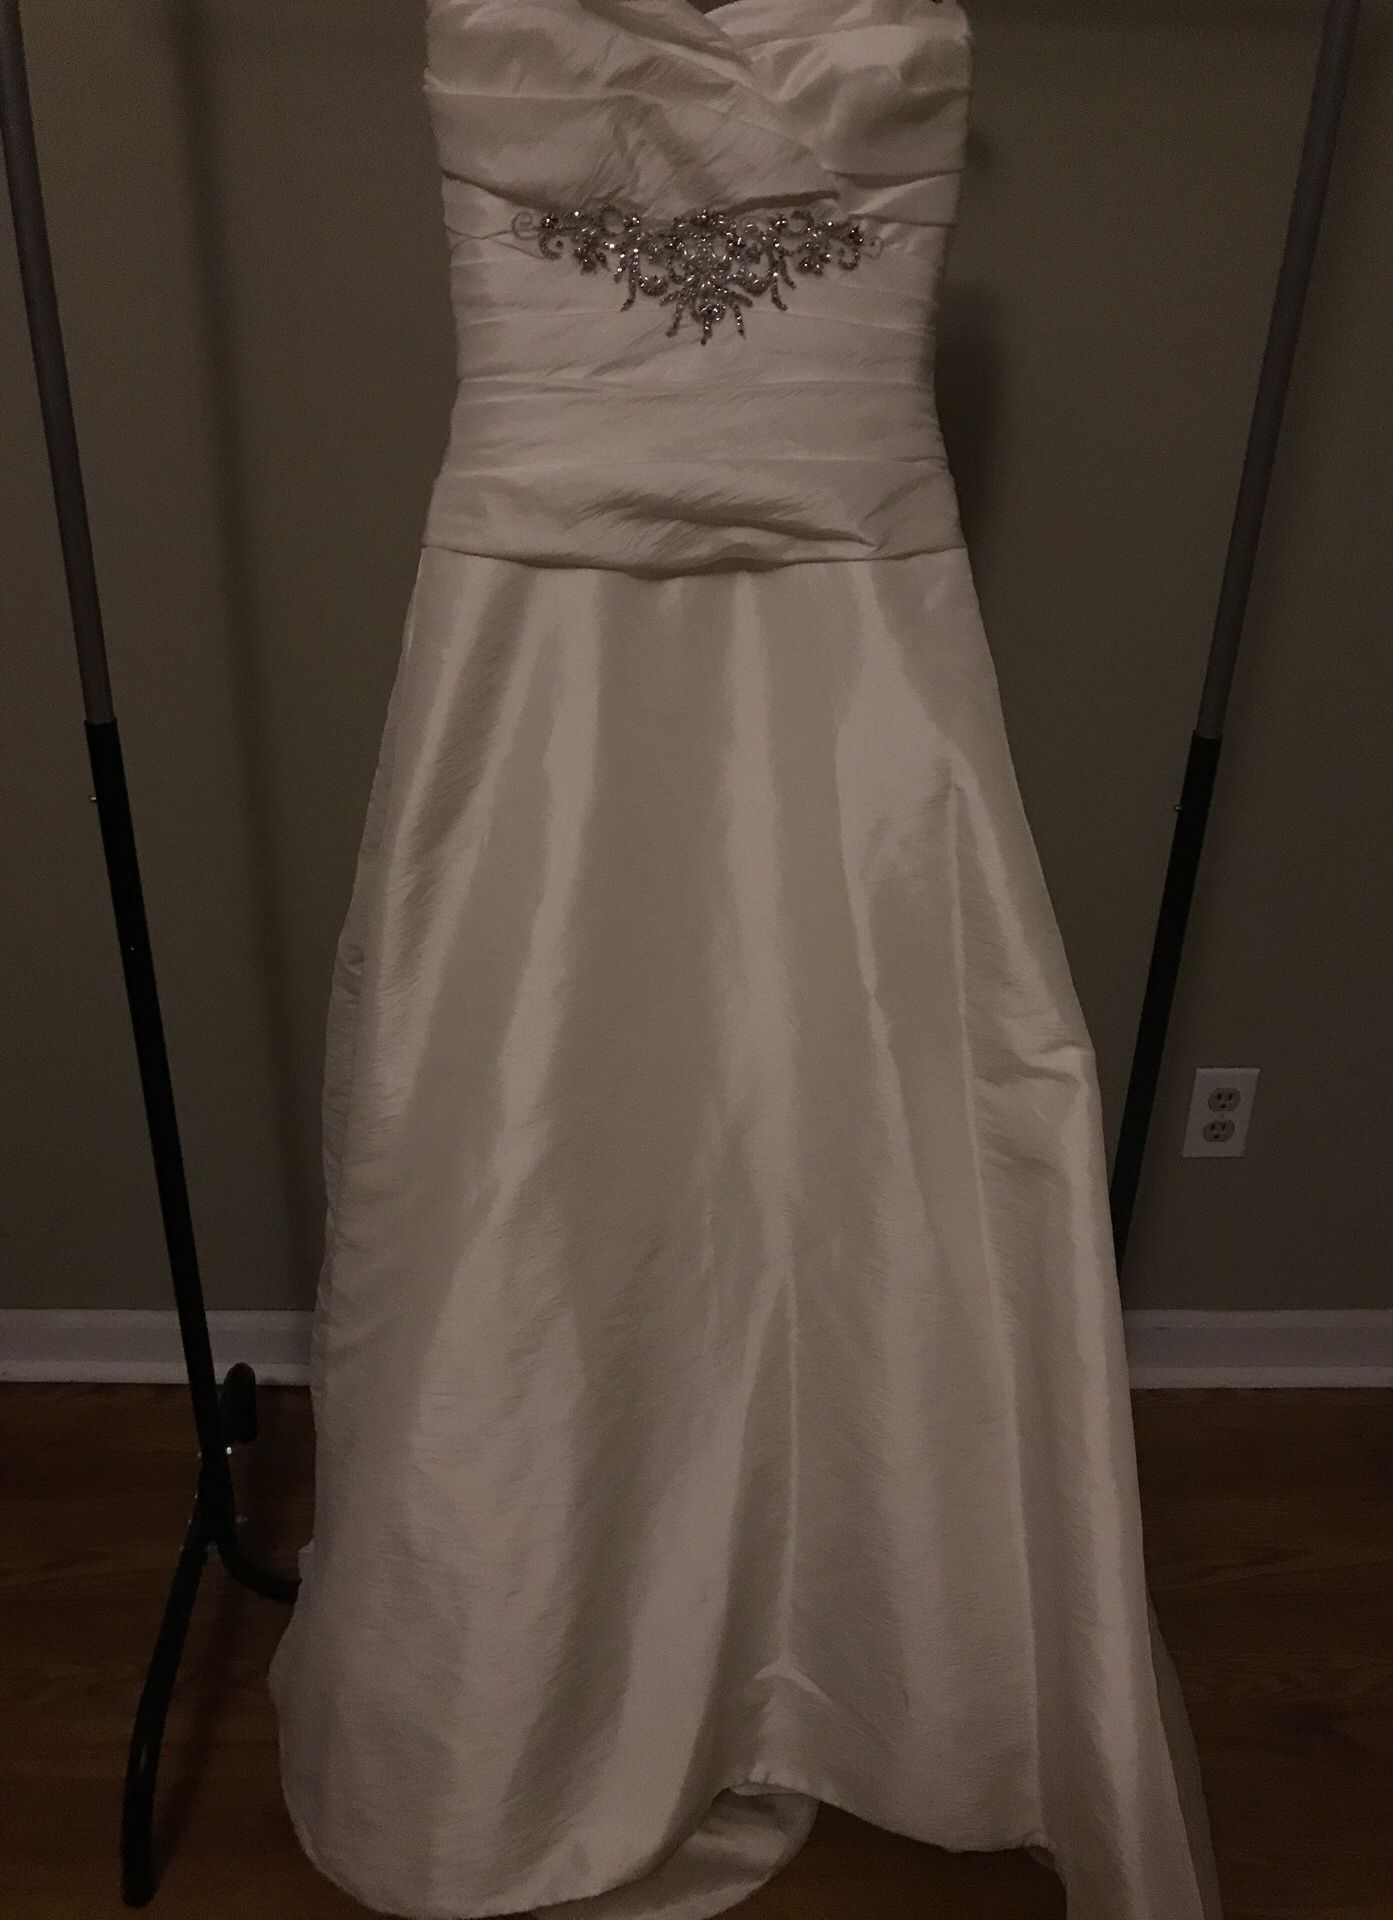 NWT Wedding Dress Gown with Sequins & Rhinestone Size 4